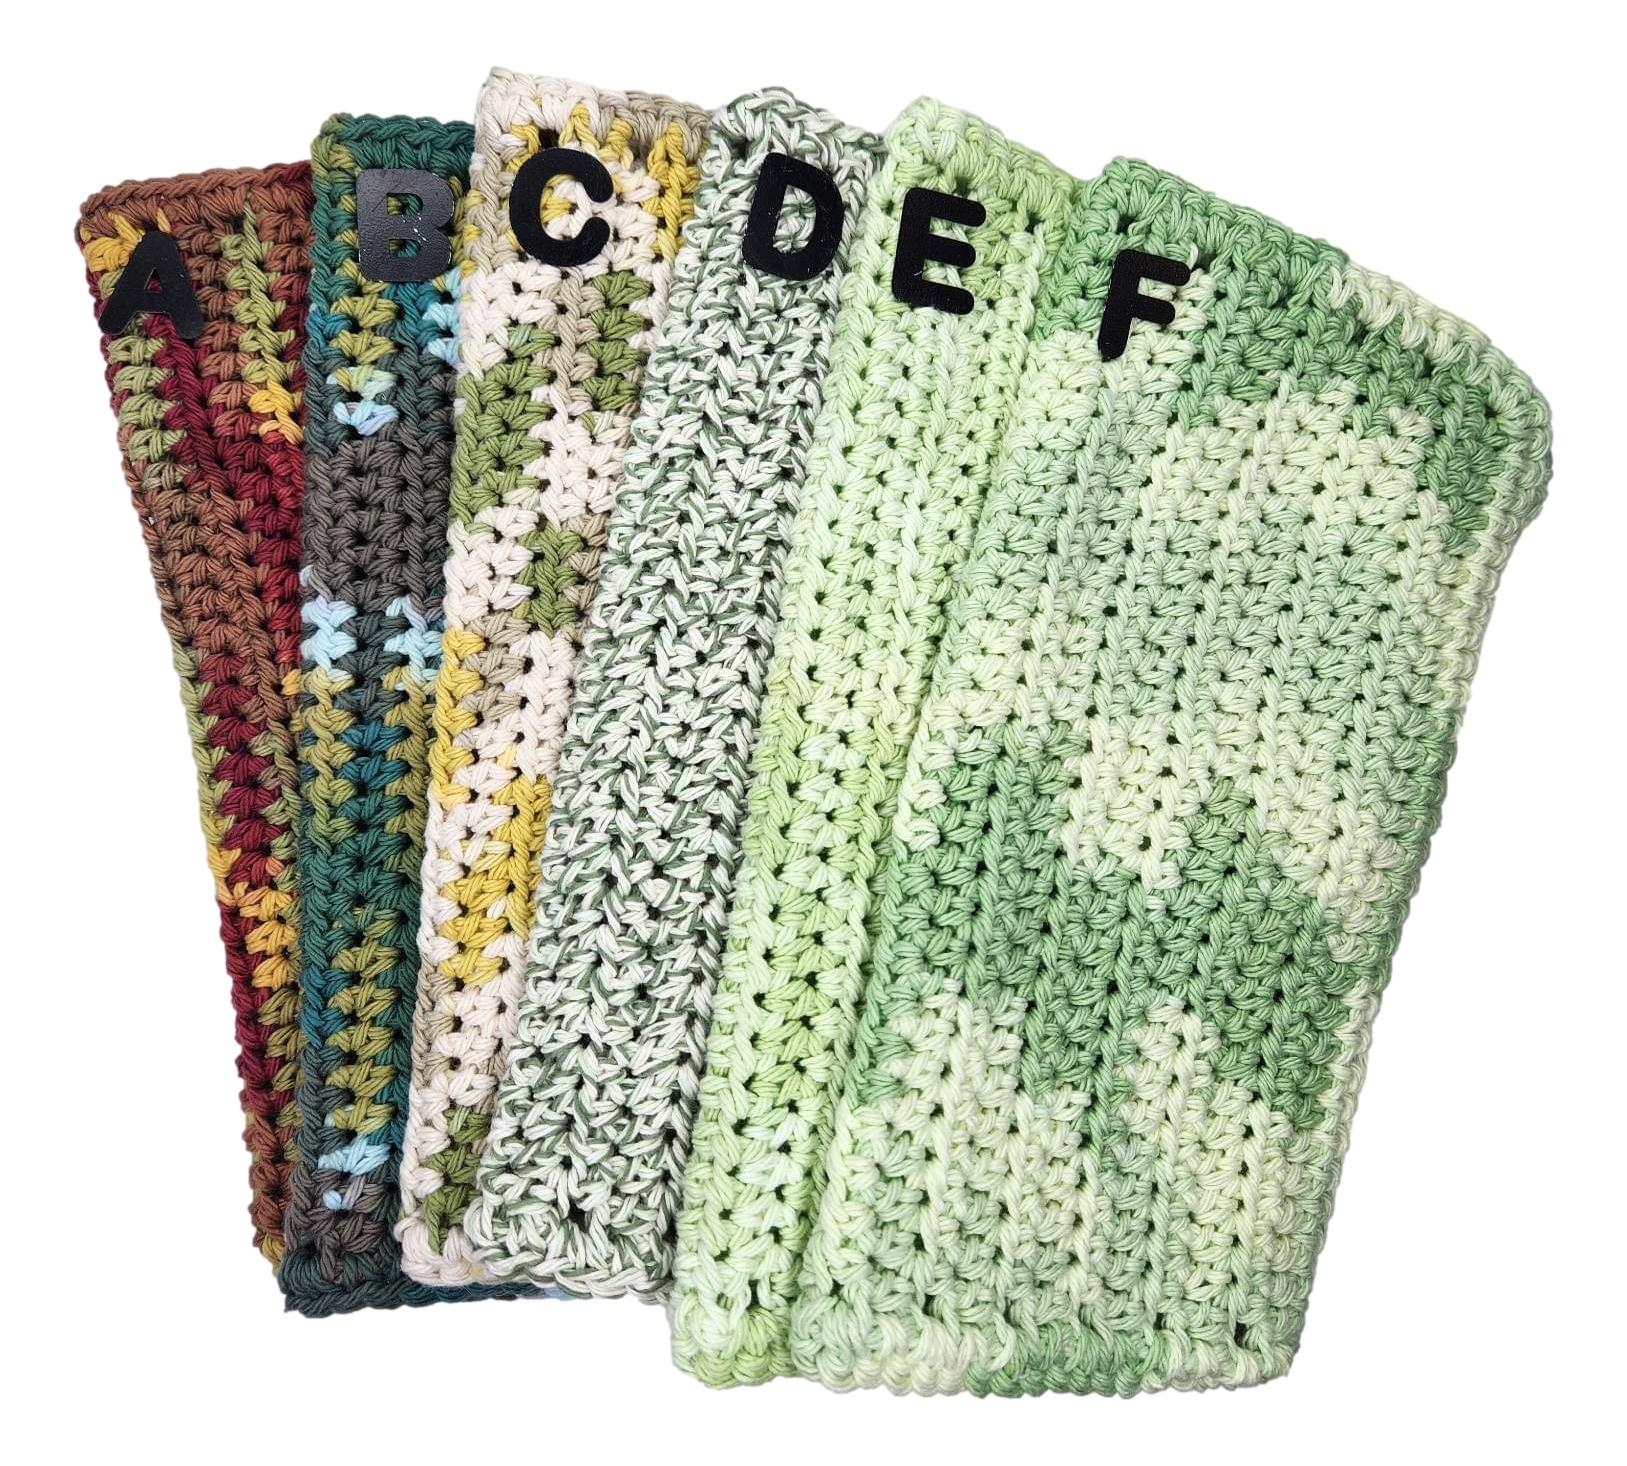 Dish Cloth Knit Single Green Tones Handwoven by New Mexico Artist 10 L x 9 W Inches - Ysleta Mission Gift Shop- VOTED 2022 El Paso's Best Gift Shop